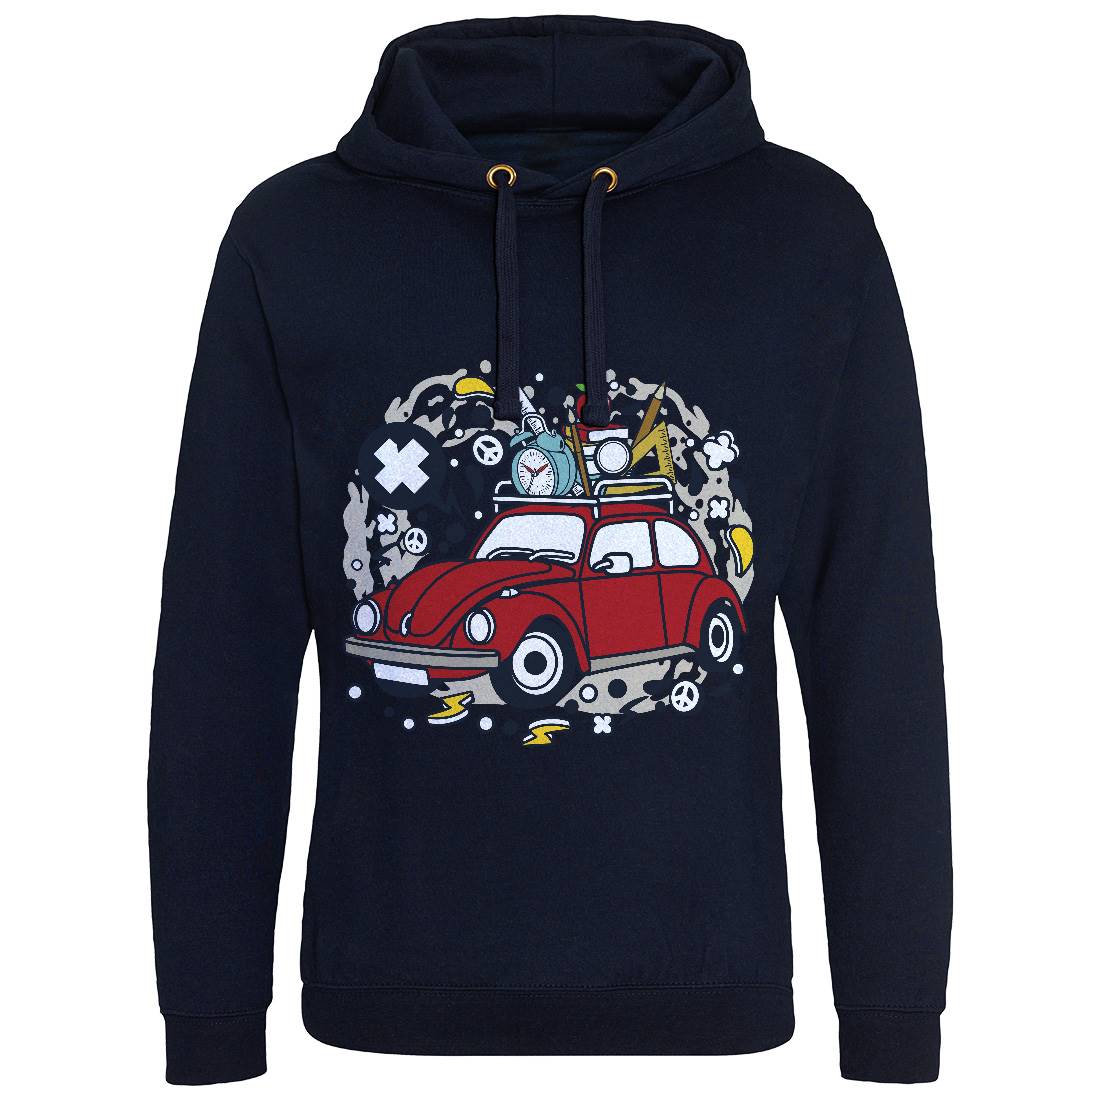 School Tour Mens Hoodie Without Pocket Work C641